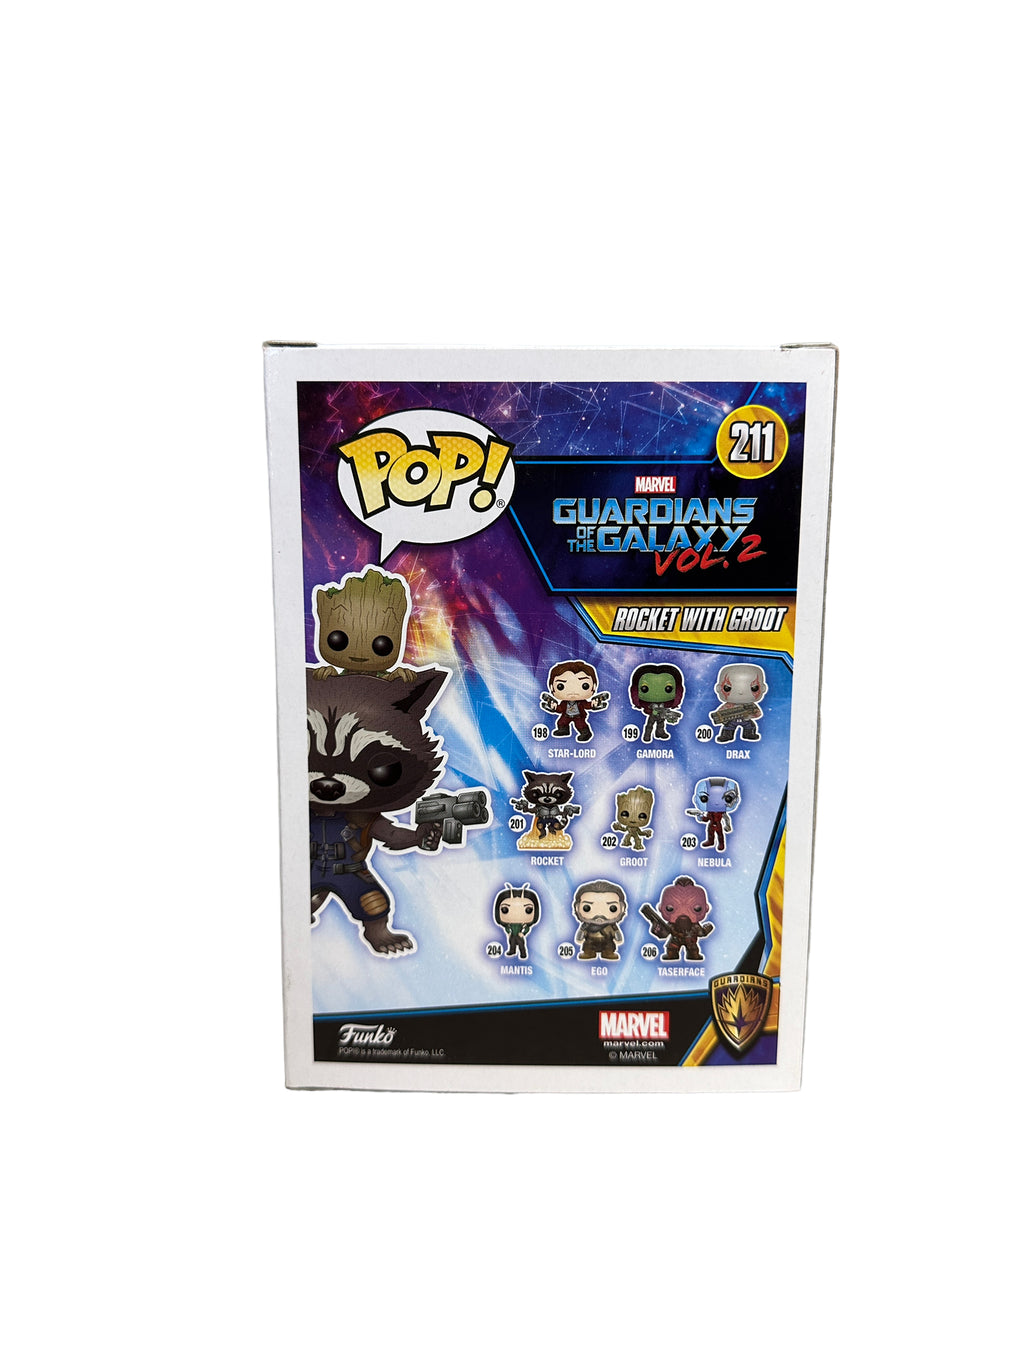 Funko Pop! Rocket With Groot #211 w/ Protector Marvel Collector Corps  Exclusive